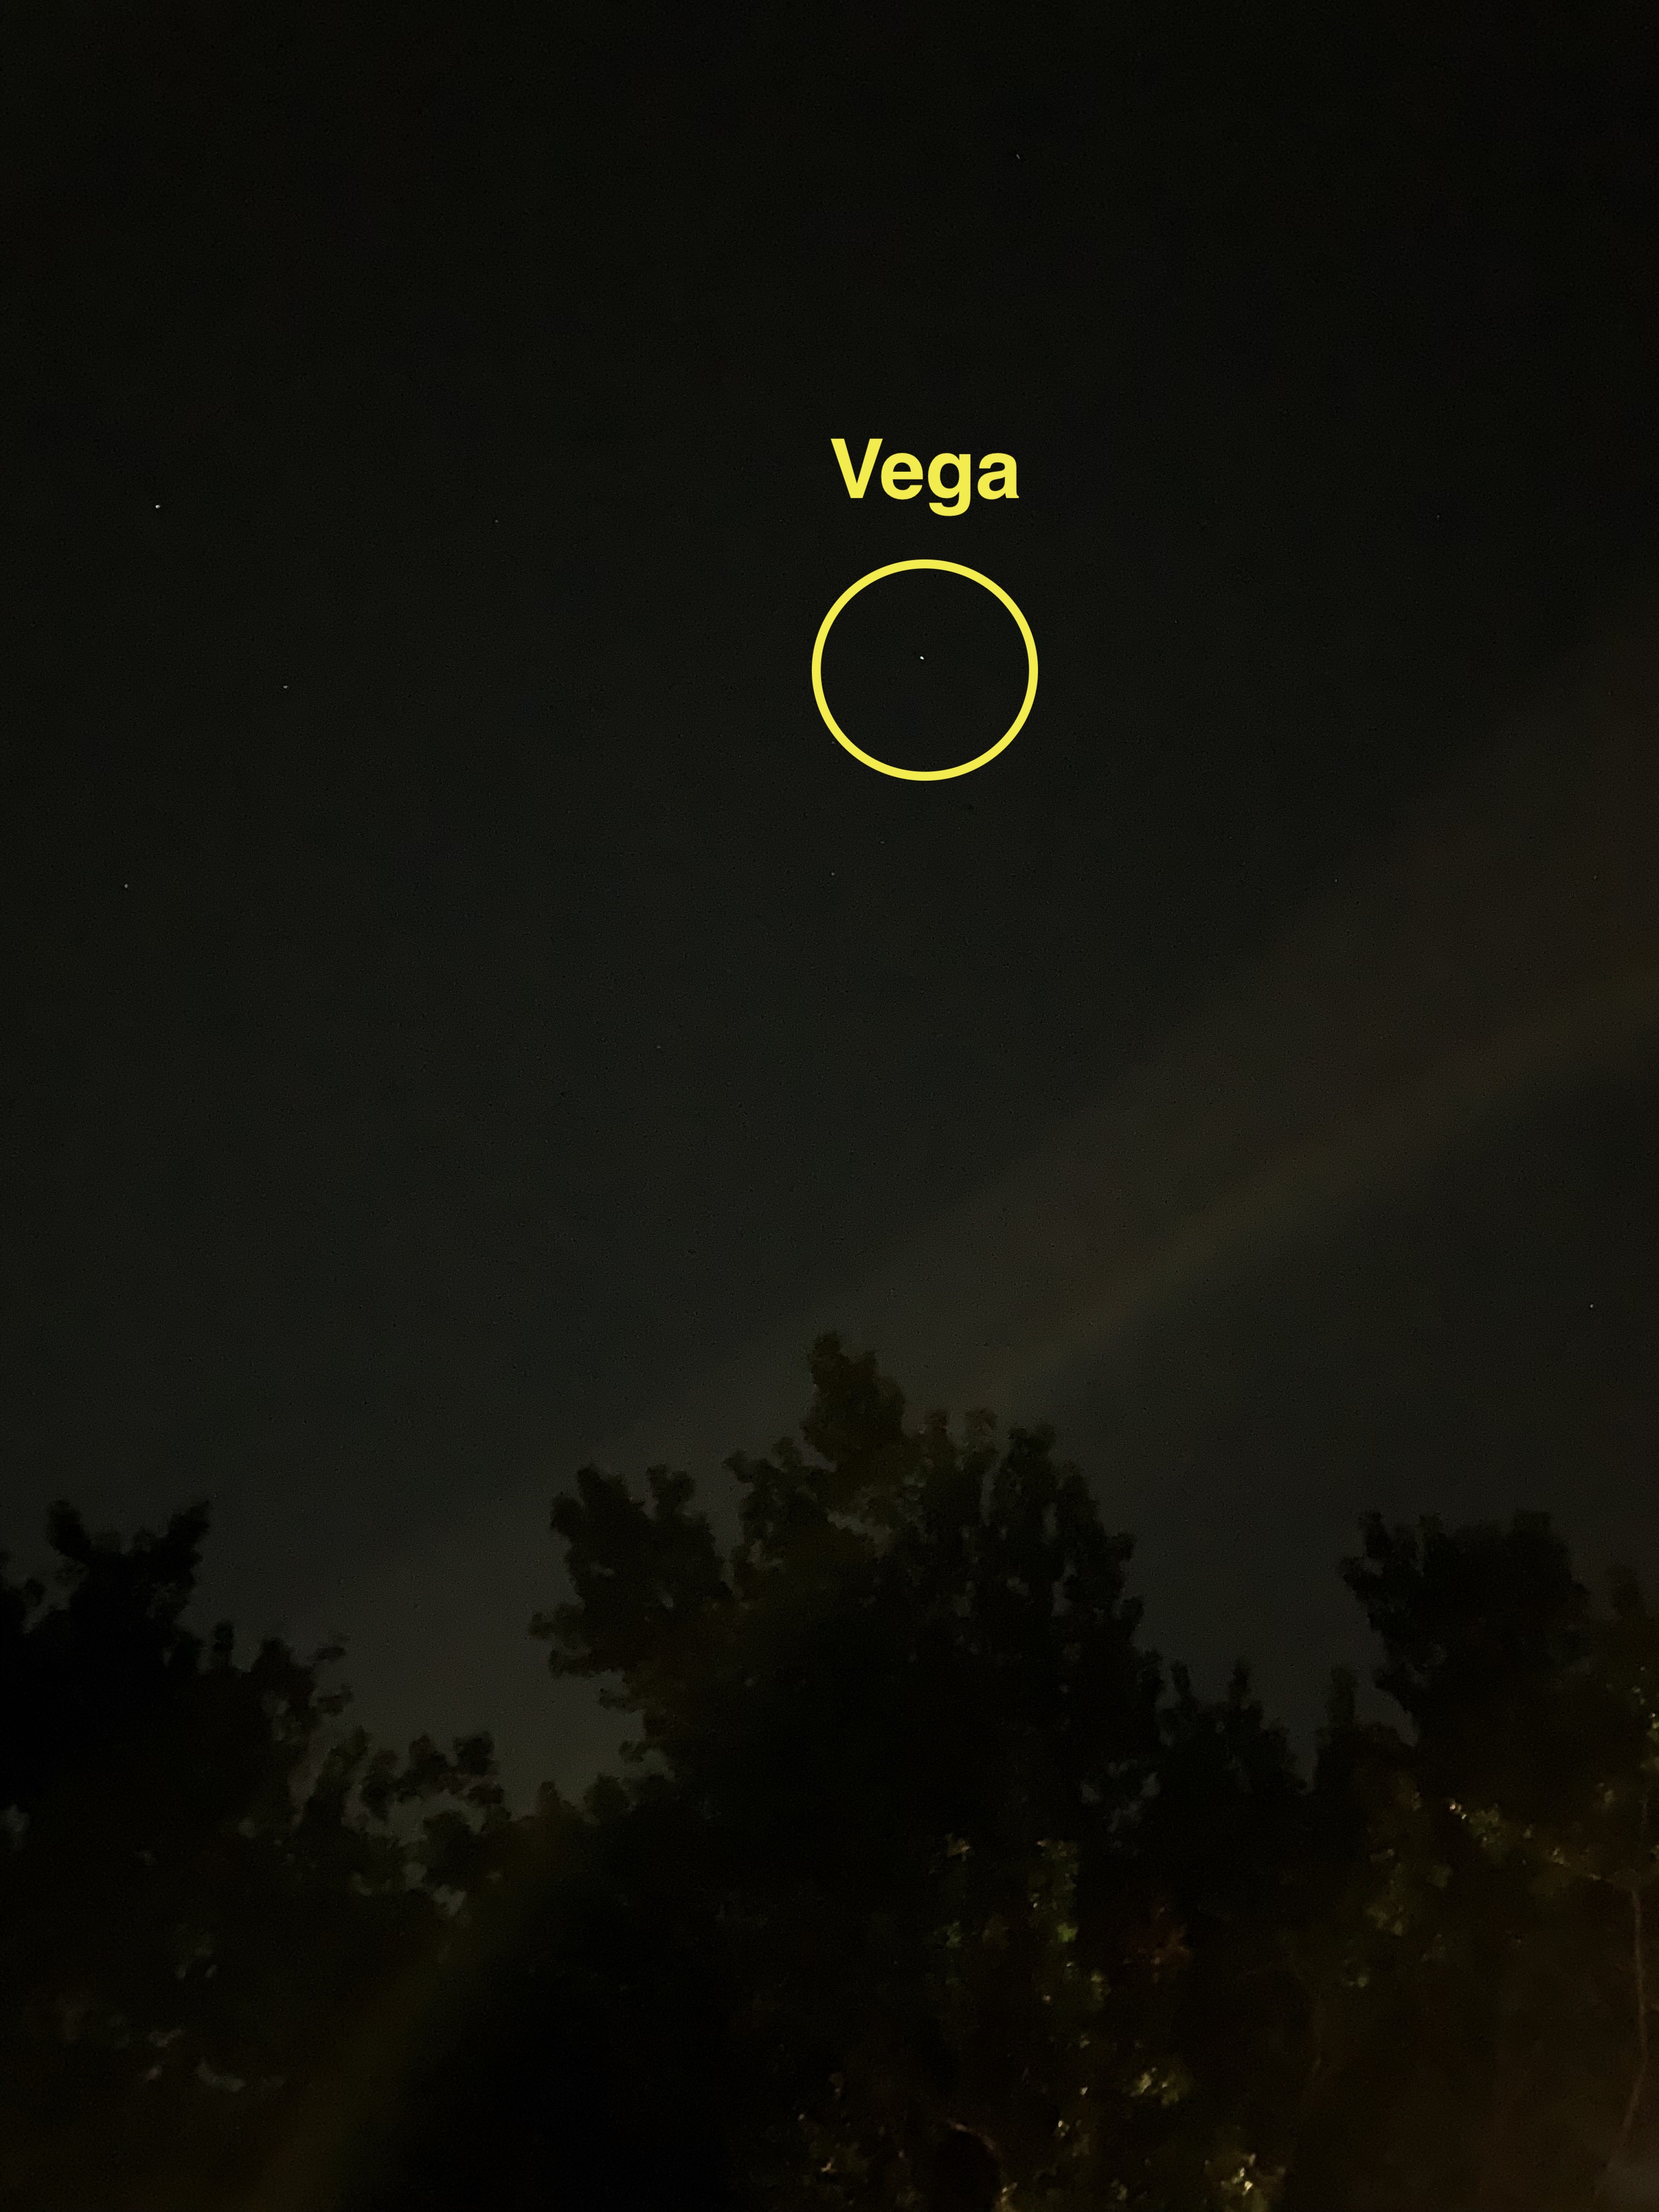 View of night sky over a cluster of trees, with one star circled and labeled as Vega.